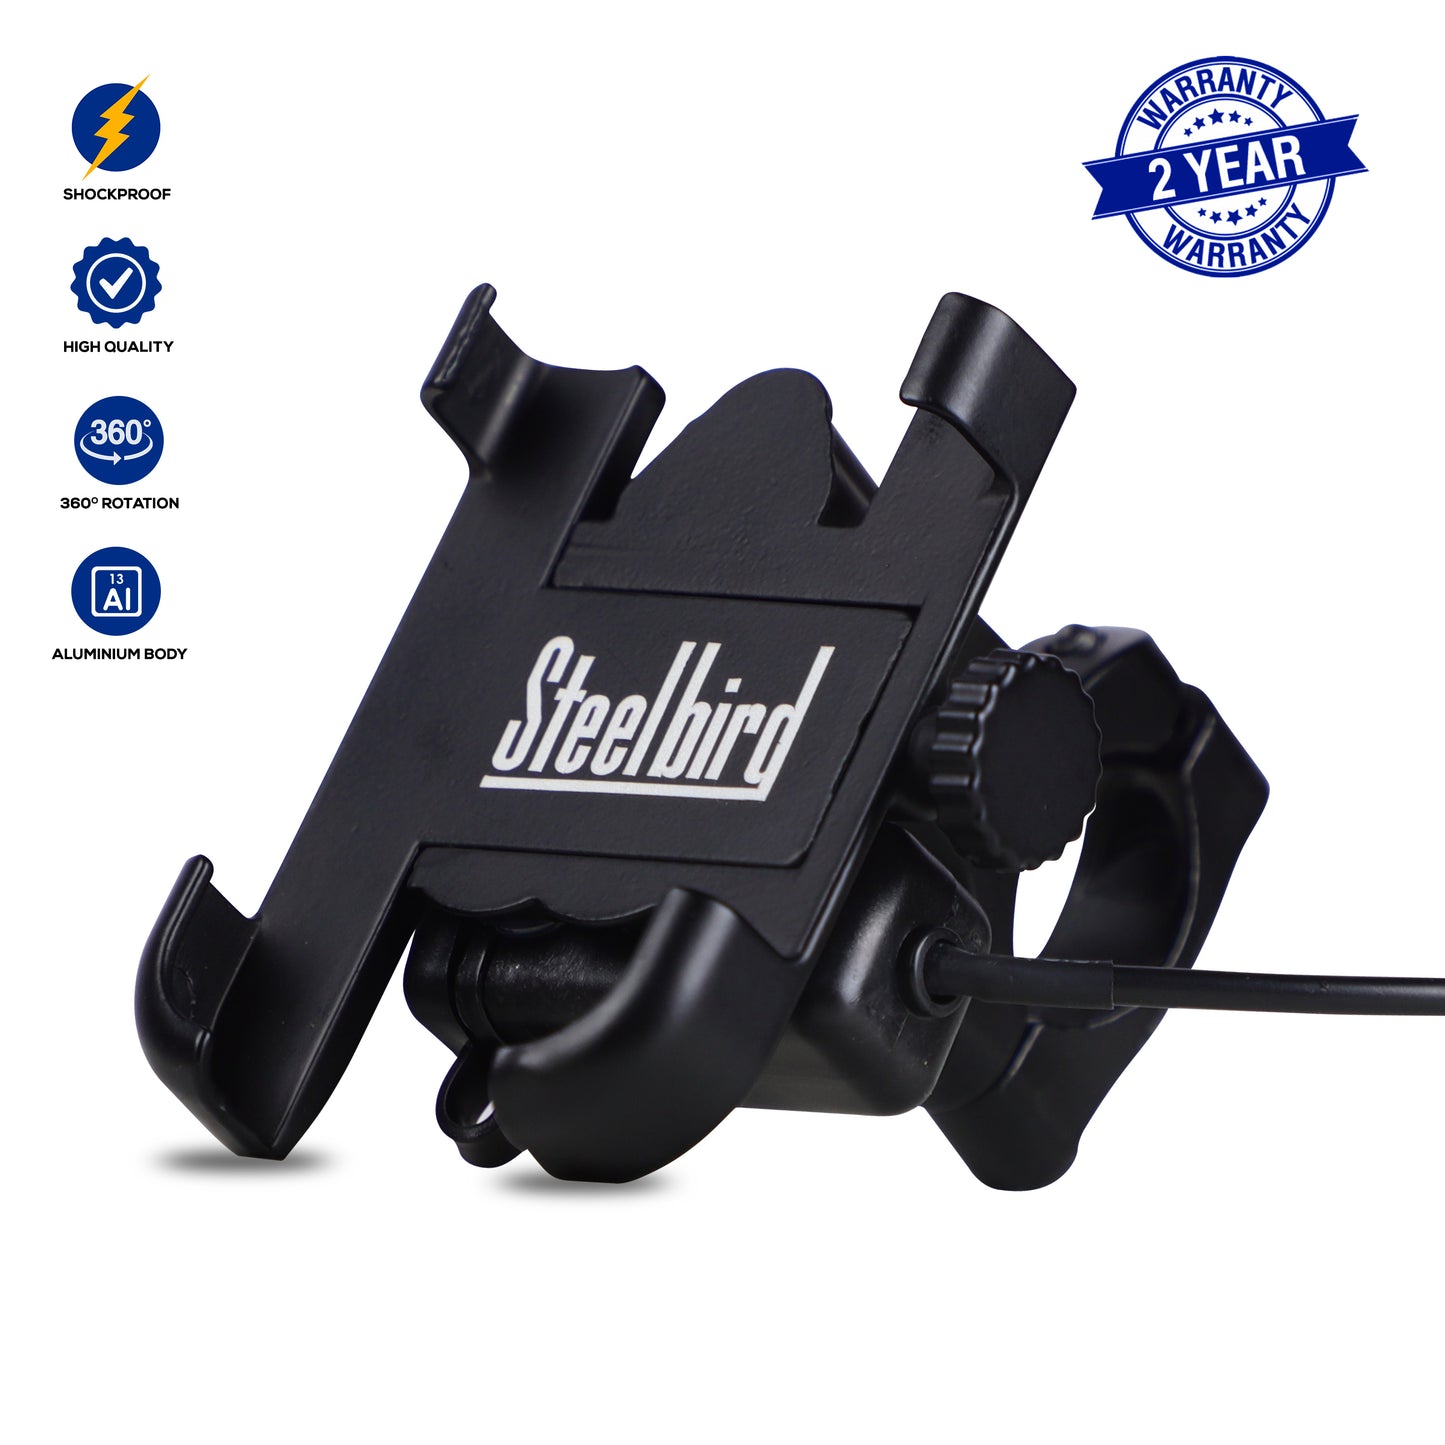 Steelbird Universal Bike Mount Phone Holder 360 Degree Rotating Handlebar Cradle Stand for Bicycle, Motorcycle, Fits All Smartphones (Mobile Holder with USB Charger)